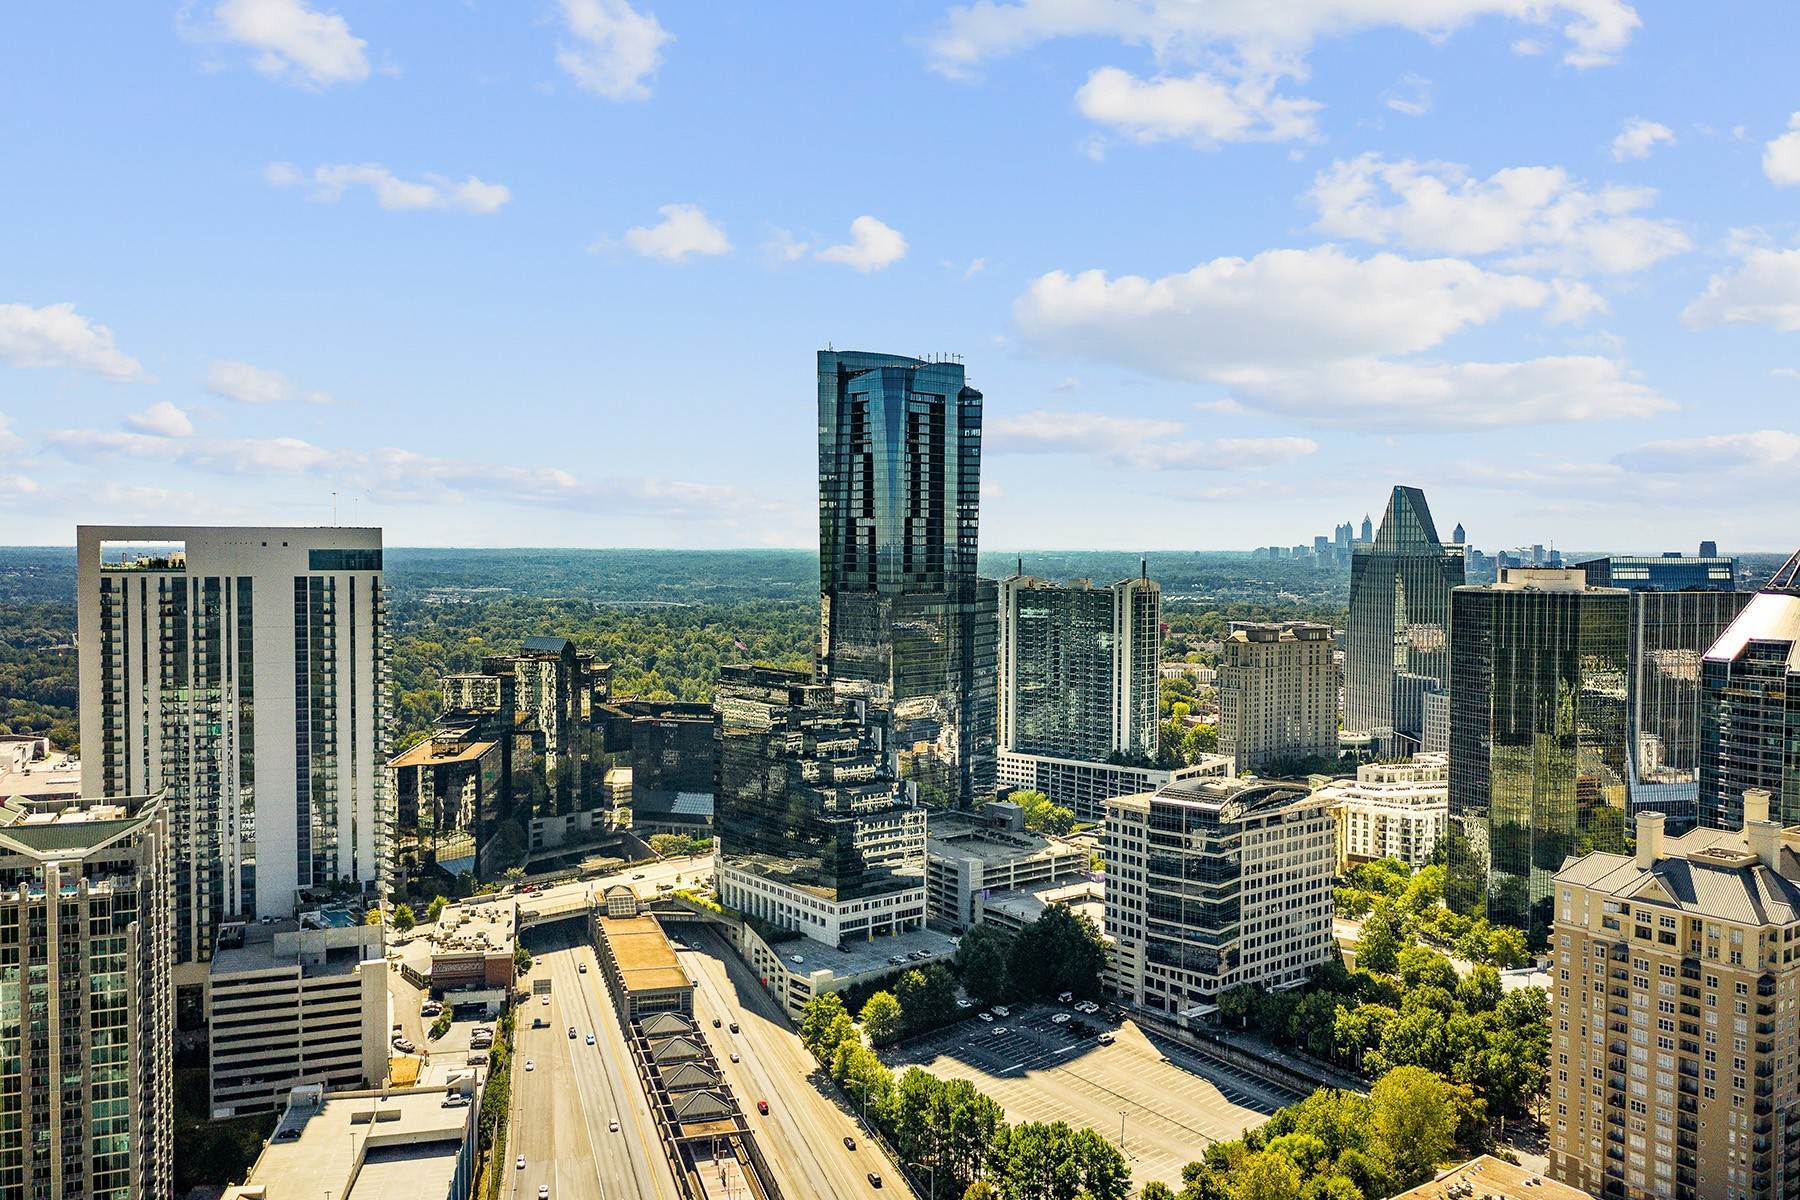 31. Condominiums at Luxurious Turnkey Living in the Heart of Buckhead with Panoramic Views 3344 Peachtree Road NE, No. 3405 Atlanta, Georgia 30326 United States